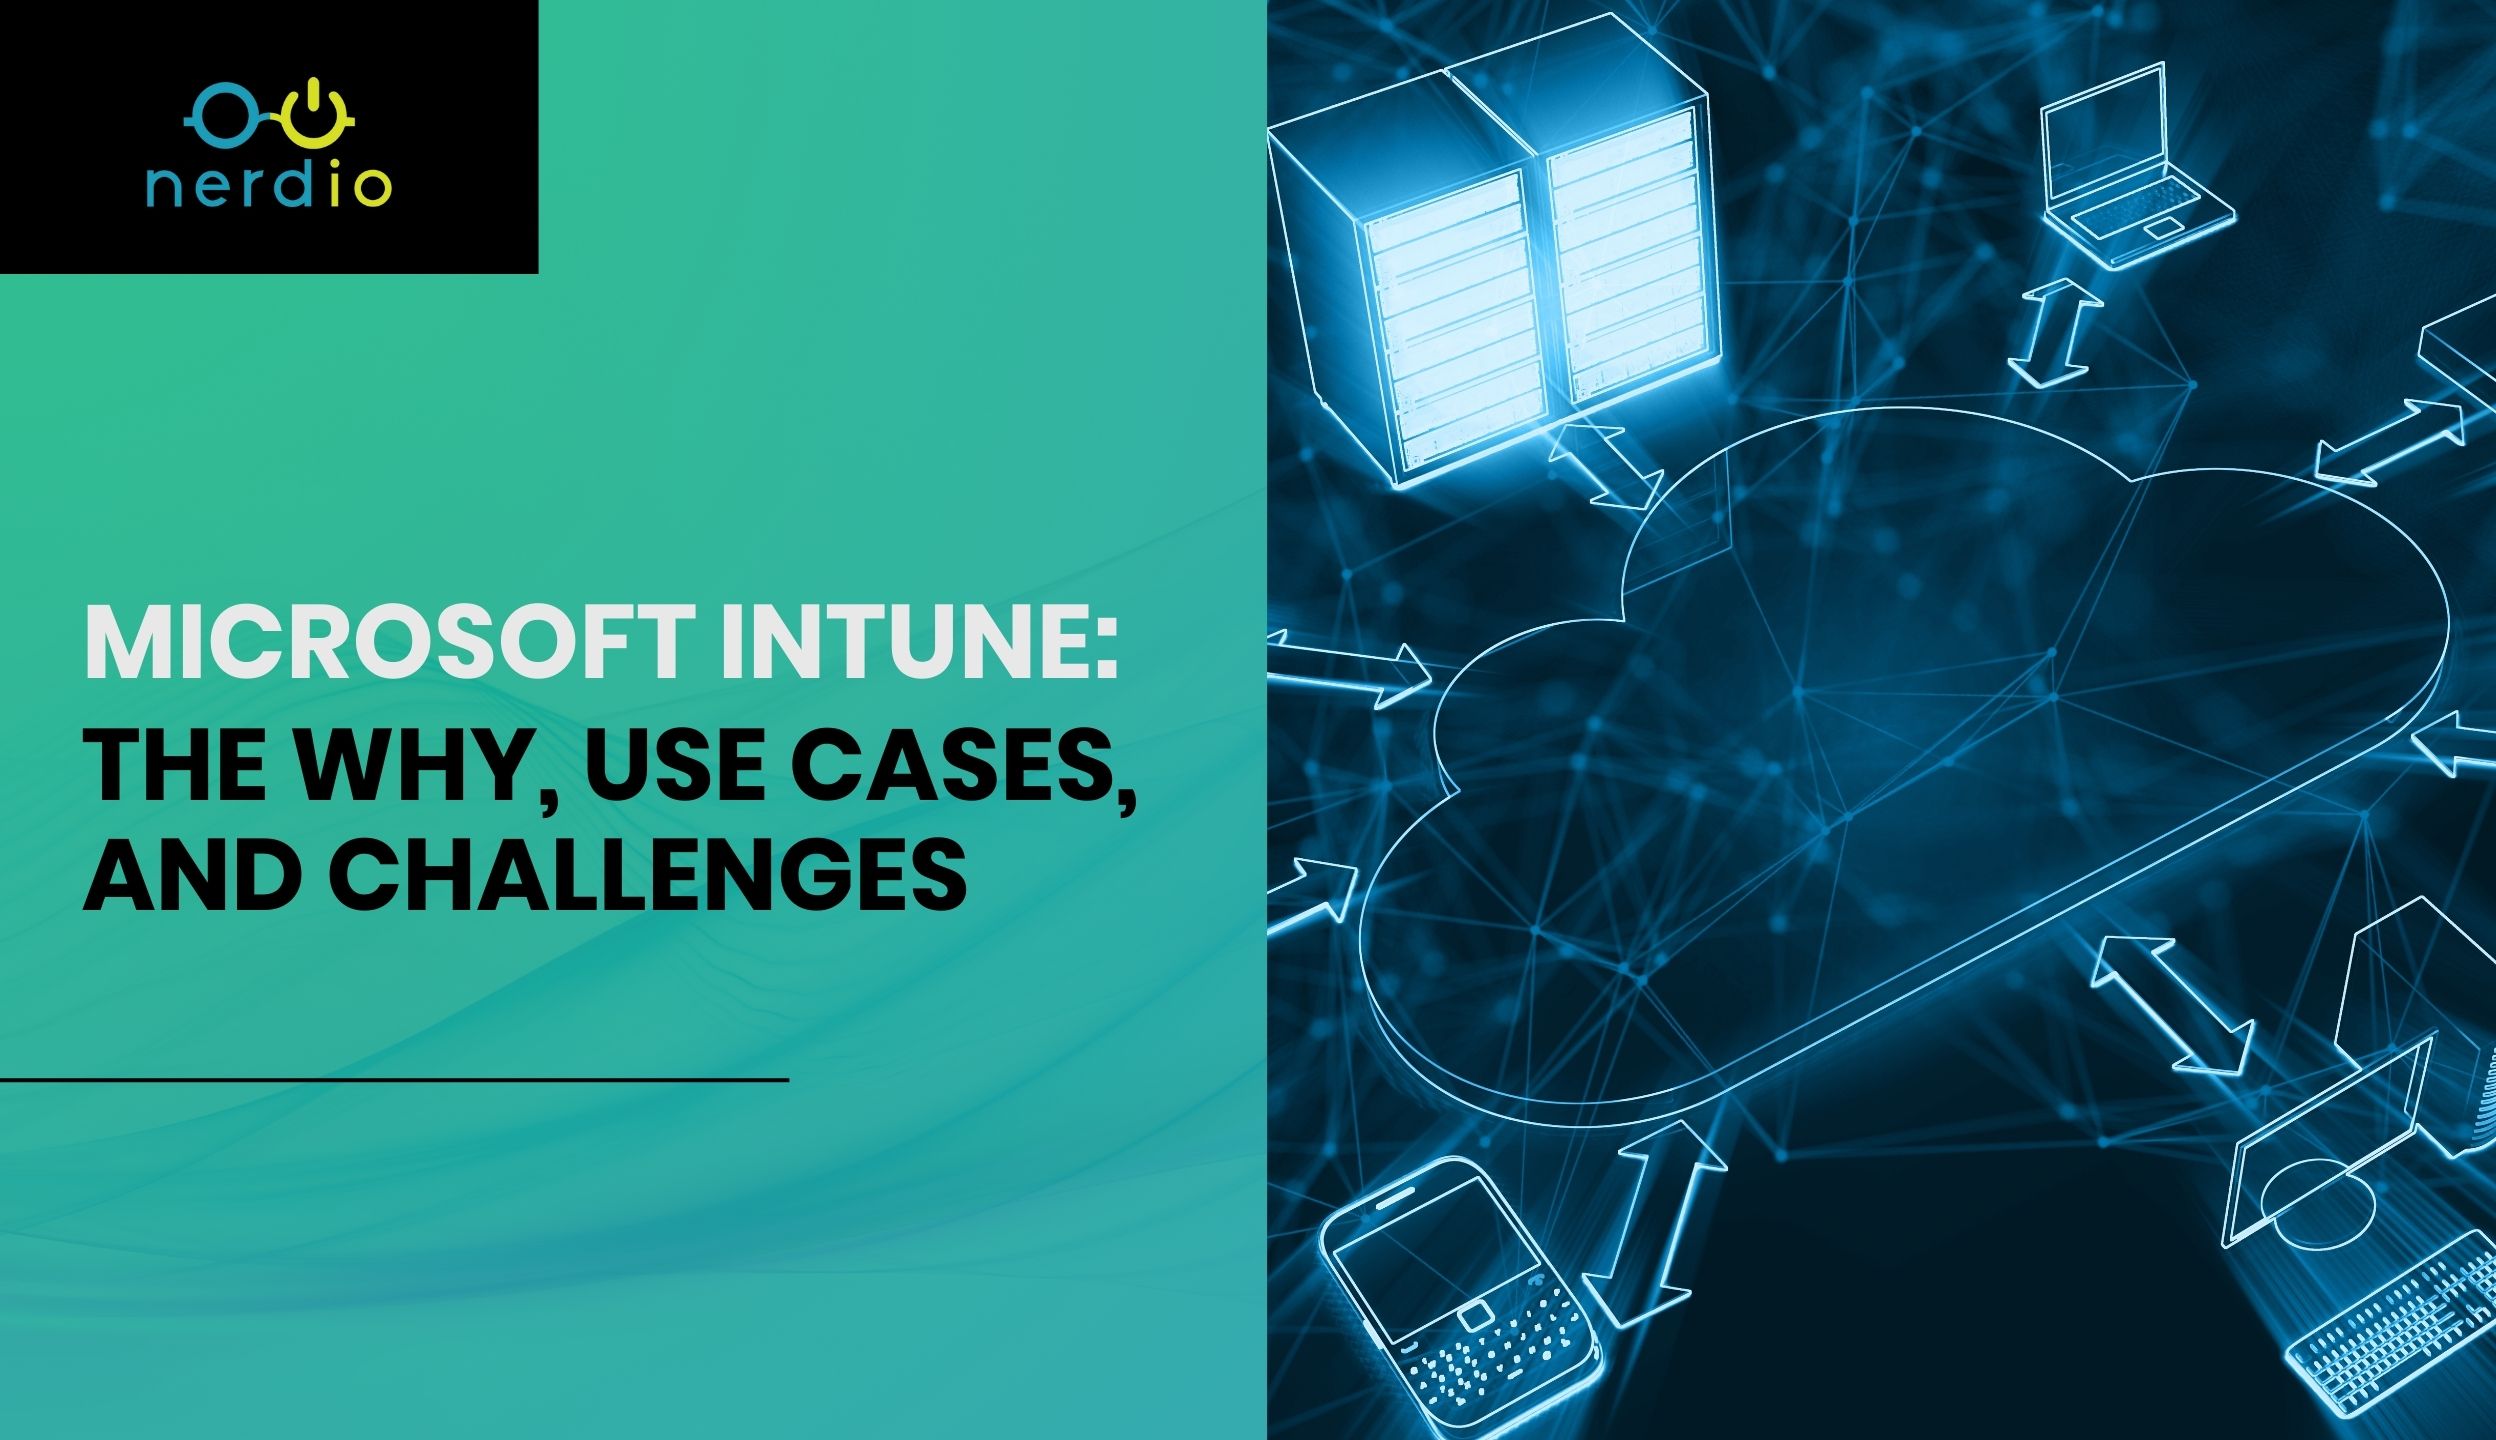 Microsoft Intune: The why, Use Cases, and Challenges